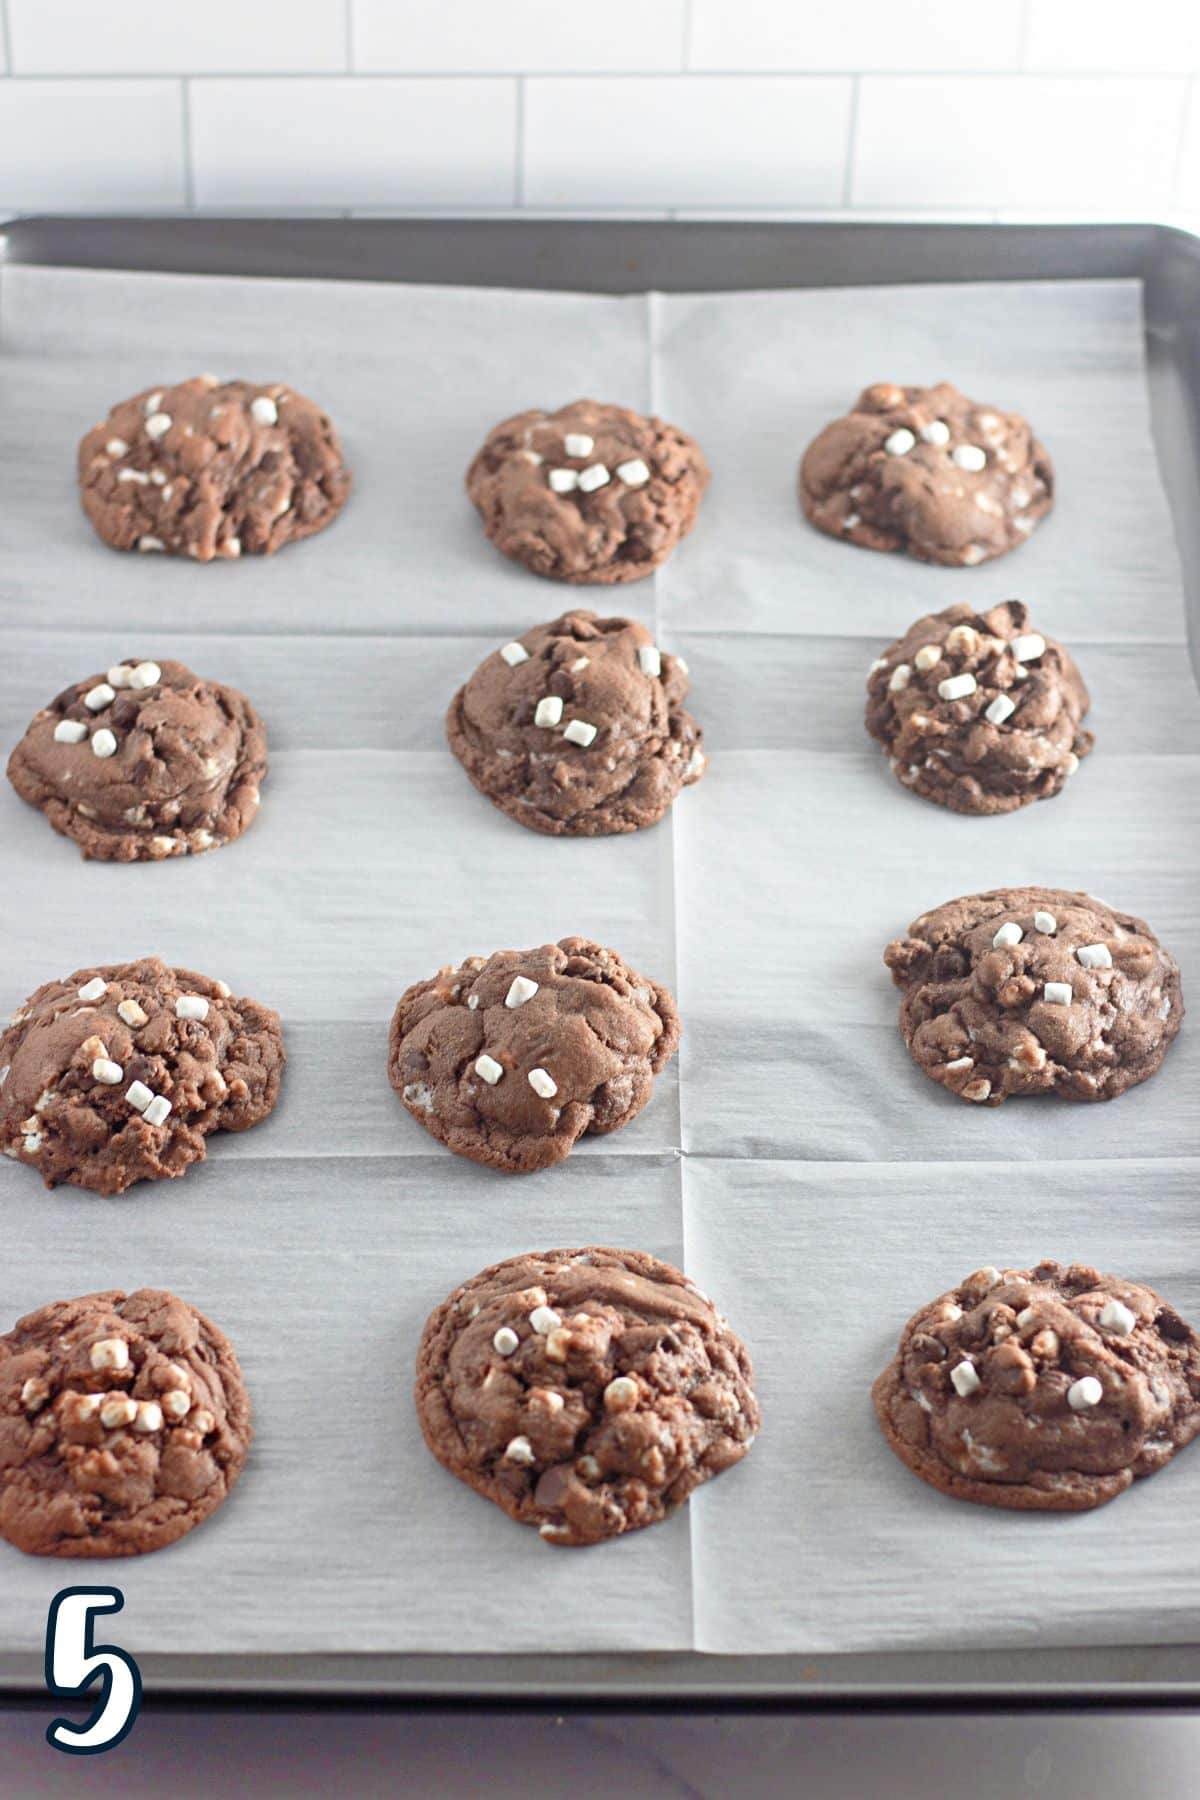 Chocolate cookies on a baking sheet.